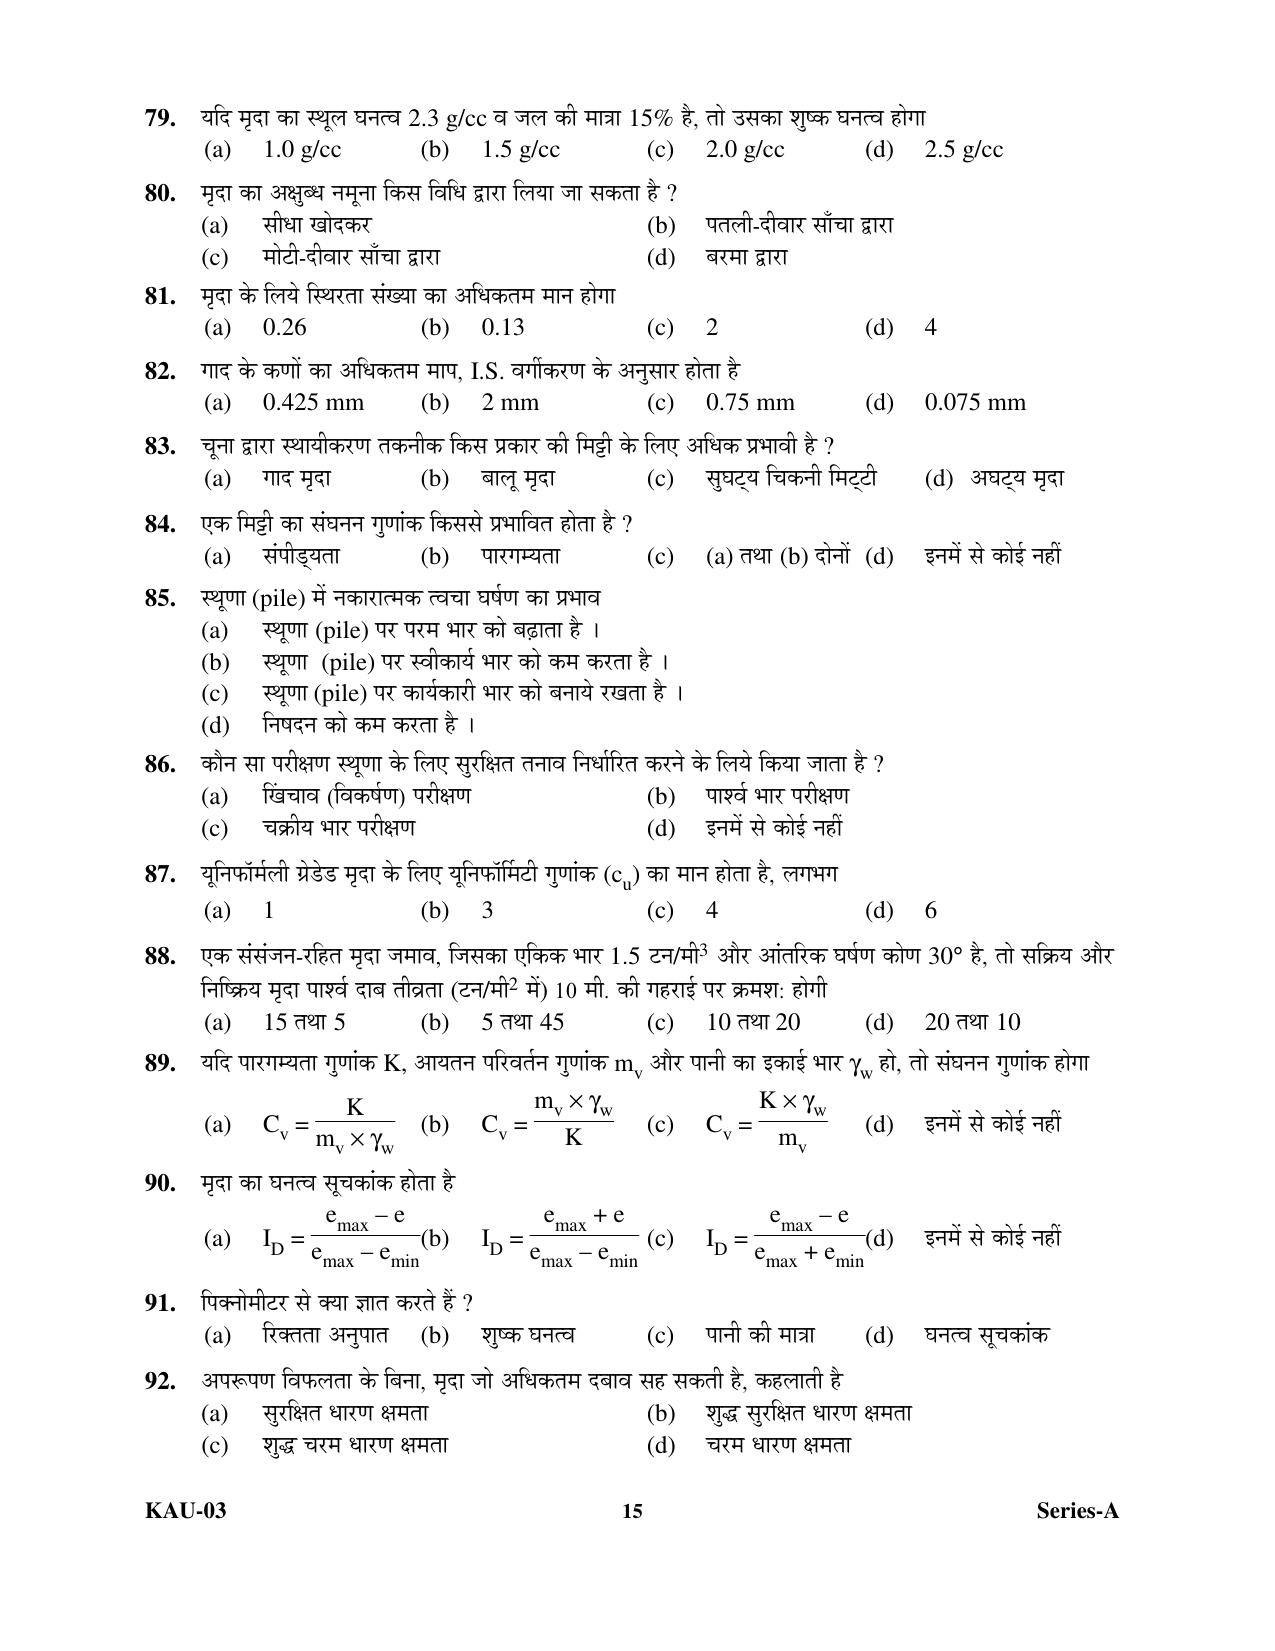 SEBI Officer Civil Engineering Previous Paper - Page 14